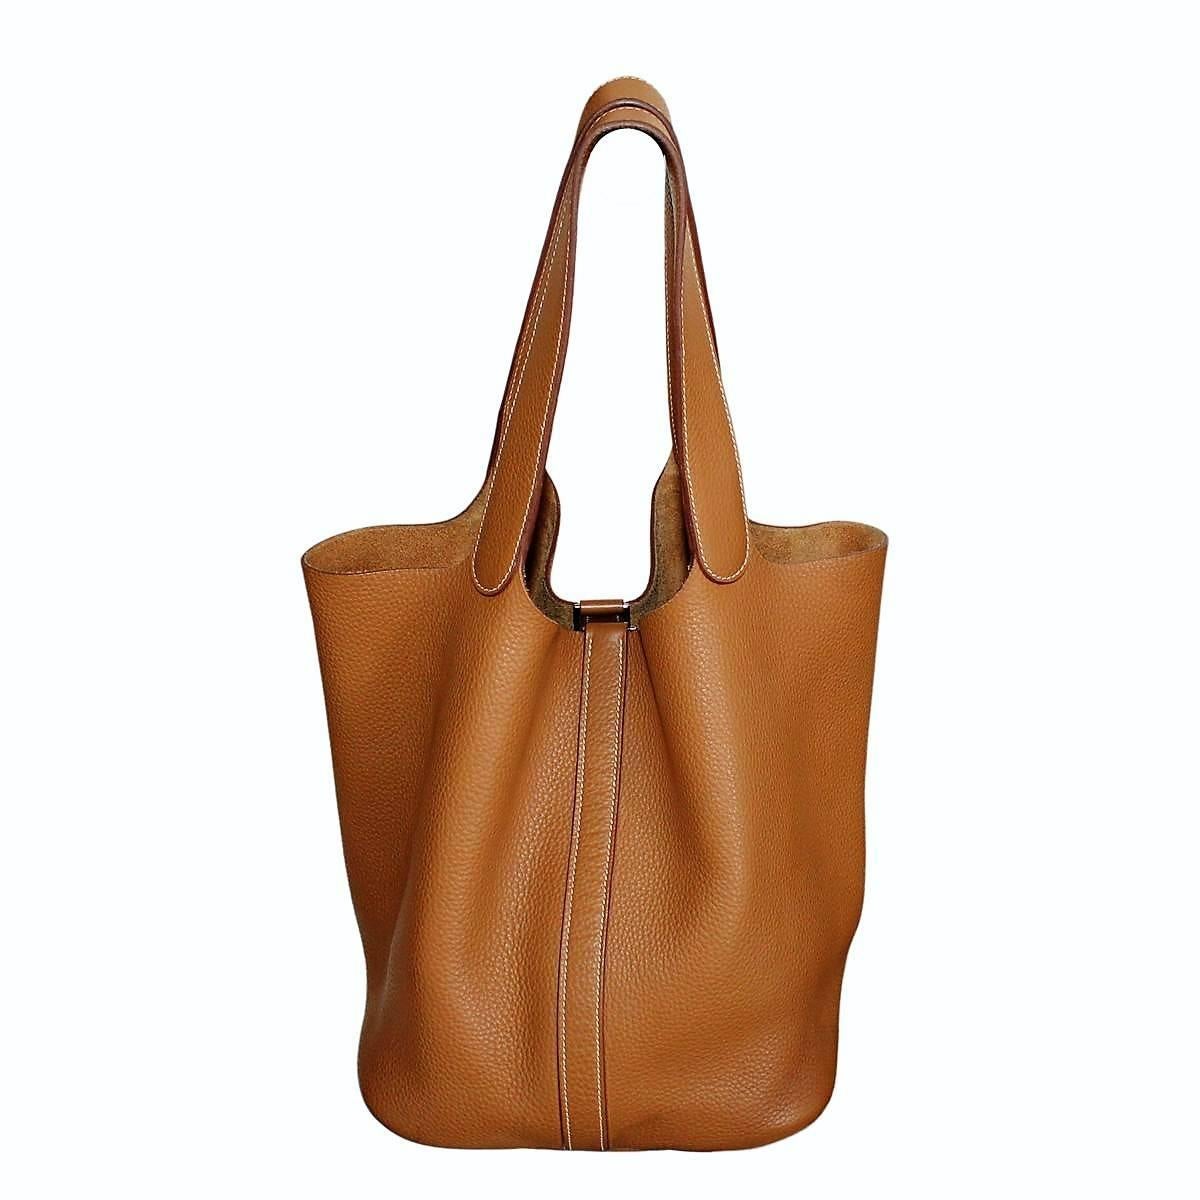 Fabulous creation from Hermes, adored by celebrities 
Brandy / camel color Clemence leather with palladium hardware
Two handles
Internal suede
Cm 26 x 26 x 21 (10.5 x 10.5 x 8.5)
Very good overall conditions (perfect internal, very small signes on